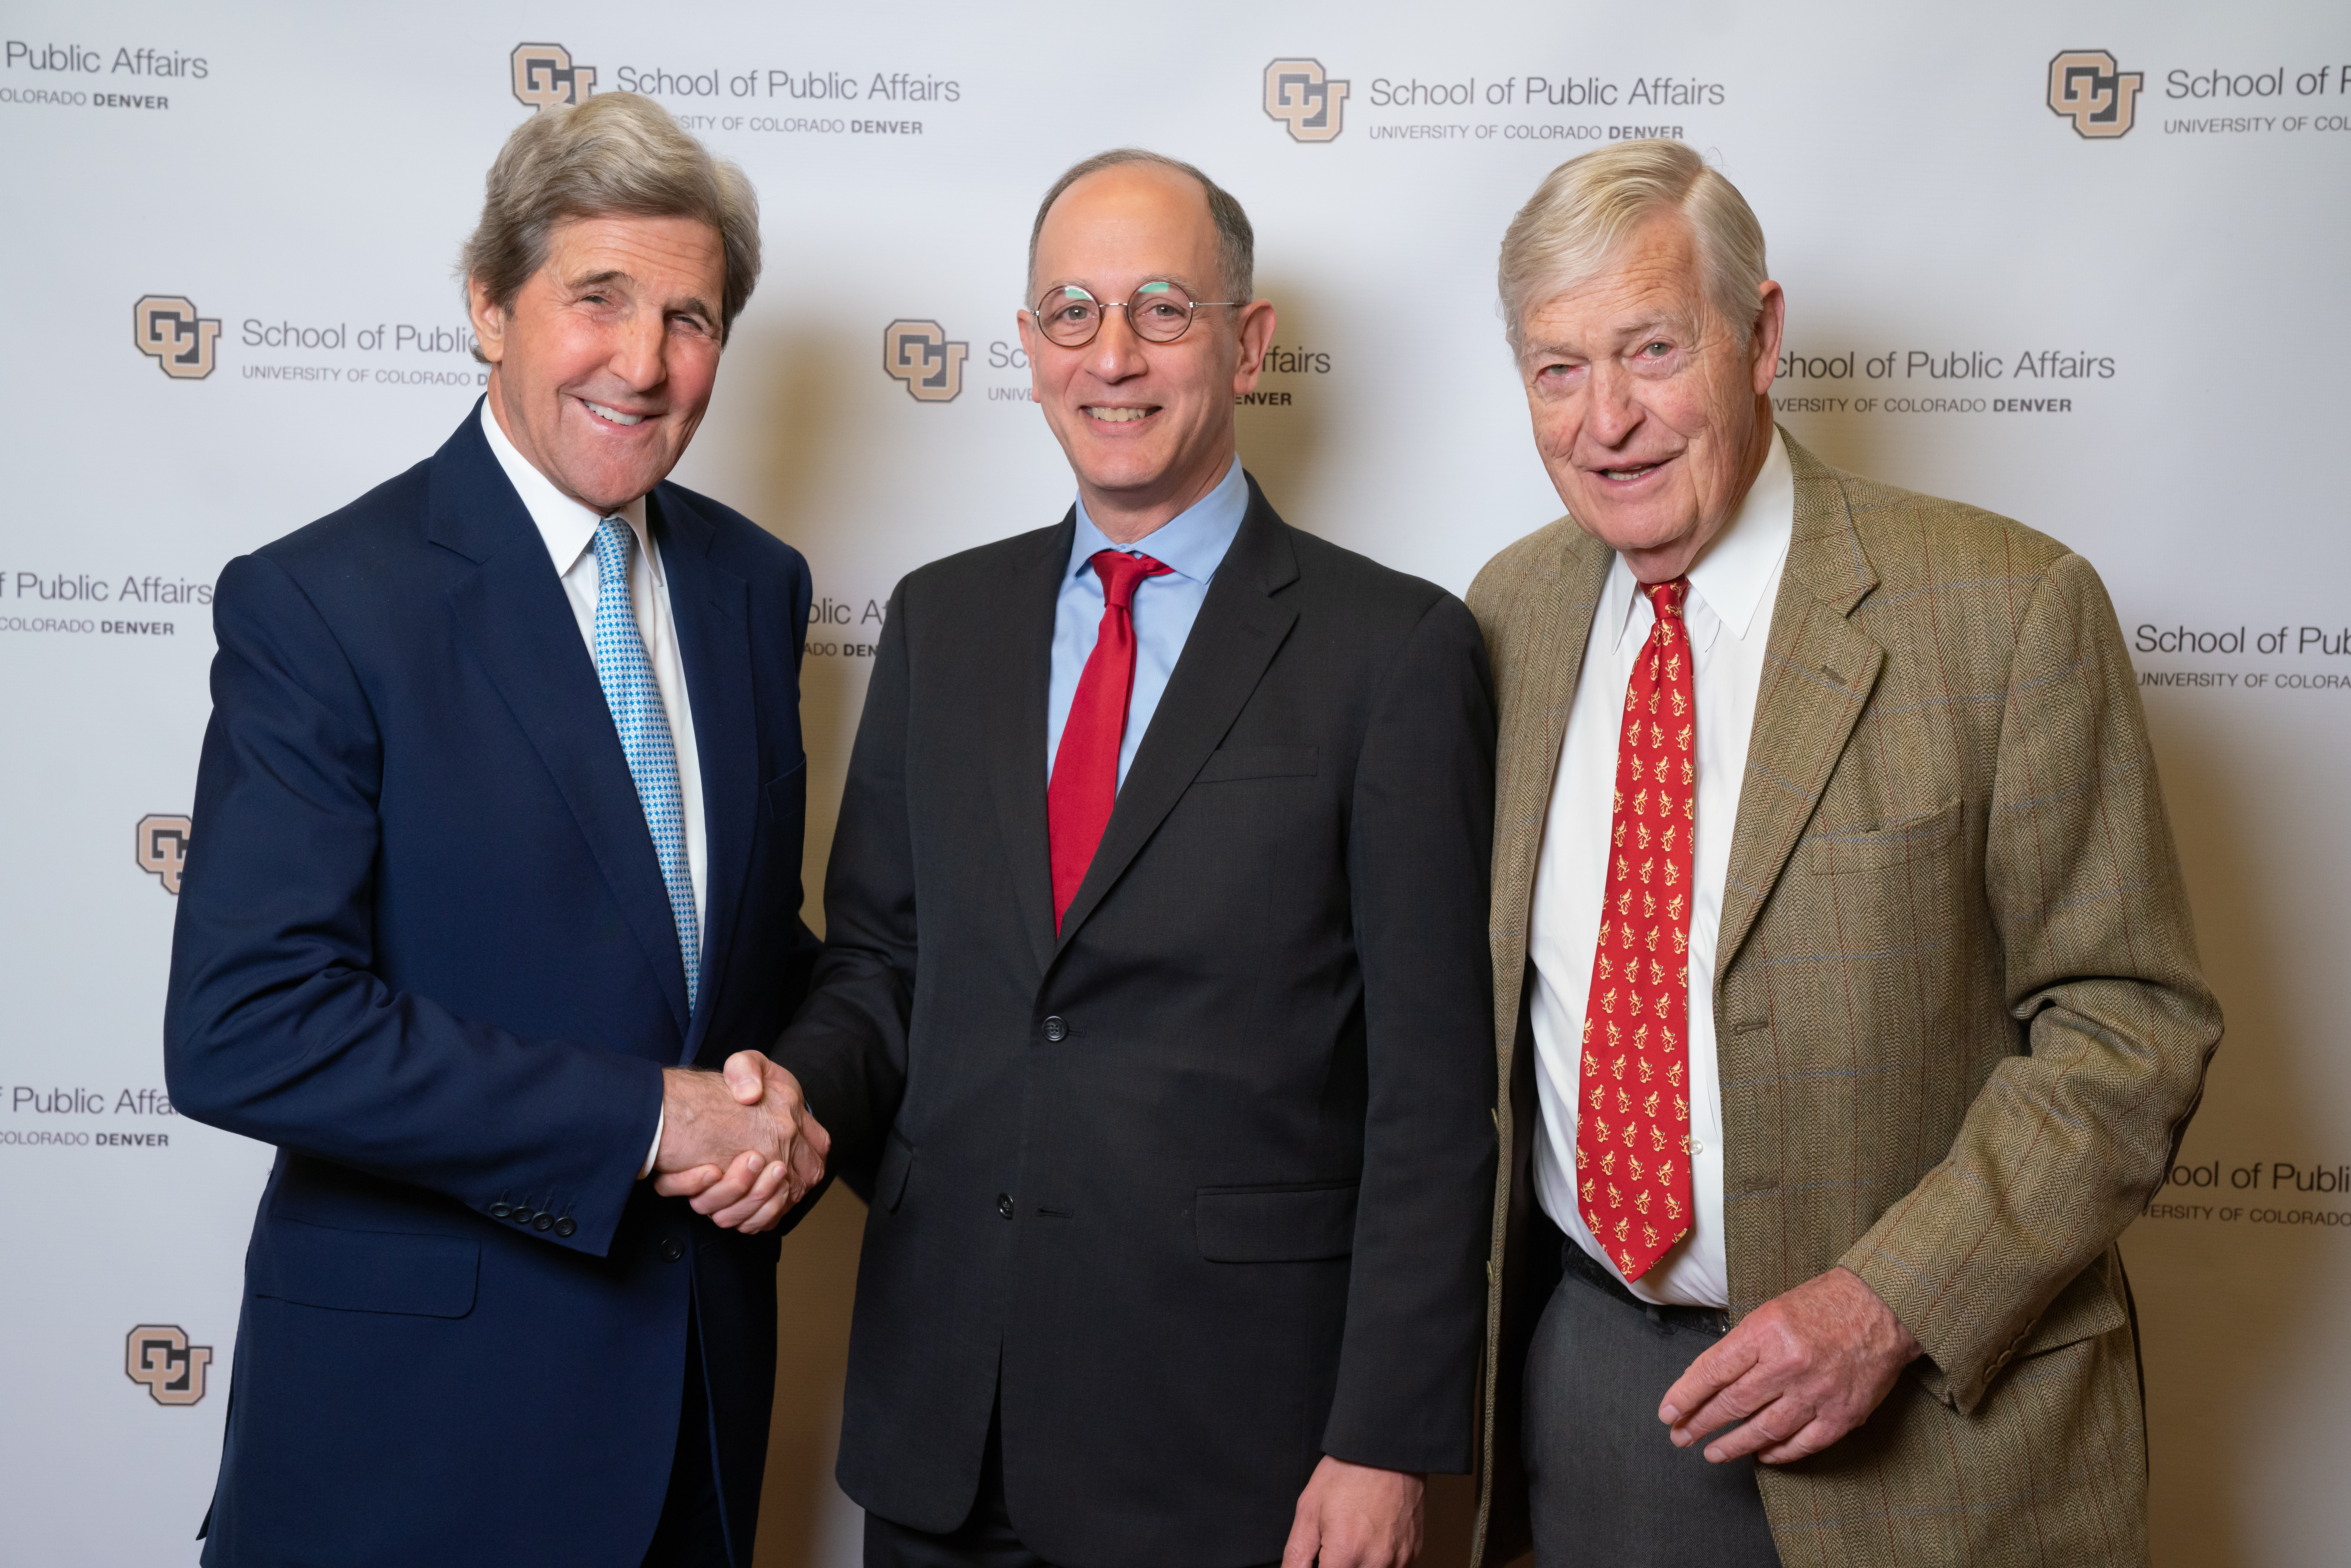 Jerry Tinianow shaking hands with former Secretary of State John Kerry and former Colorado Senator Tim Wirth standing next to them